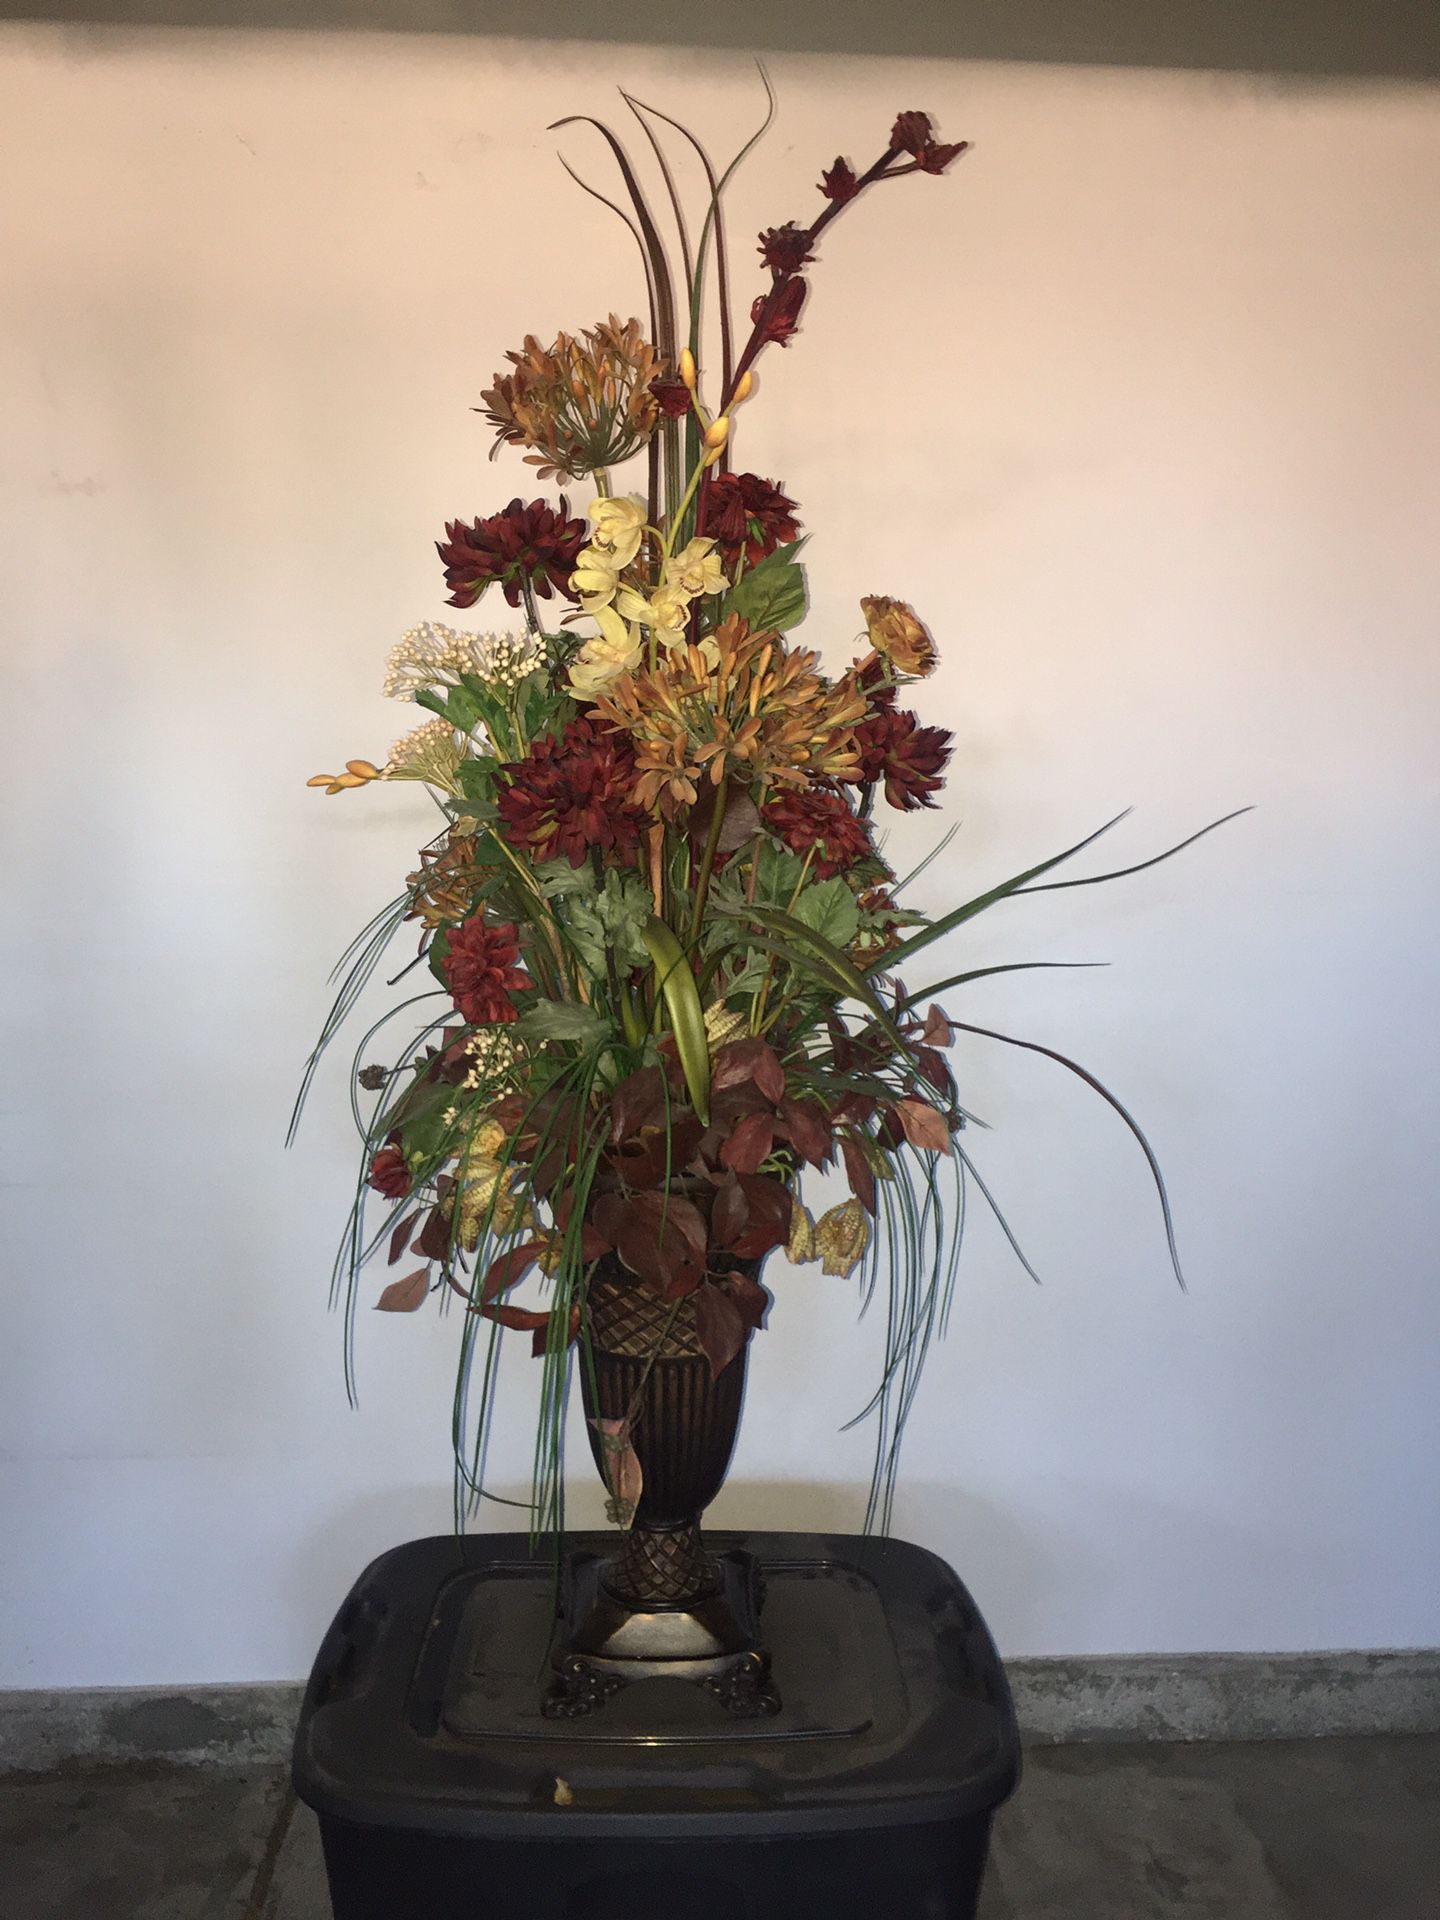 48 inch high decorative vase and dry flowers with 18 inch vase